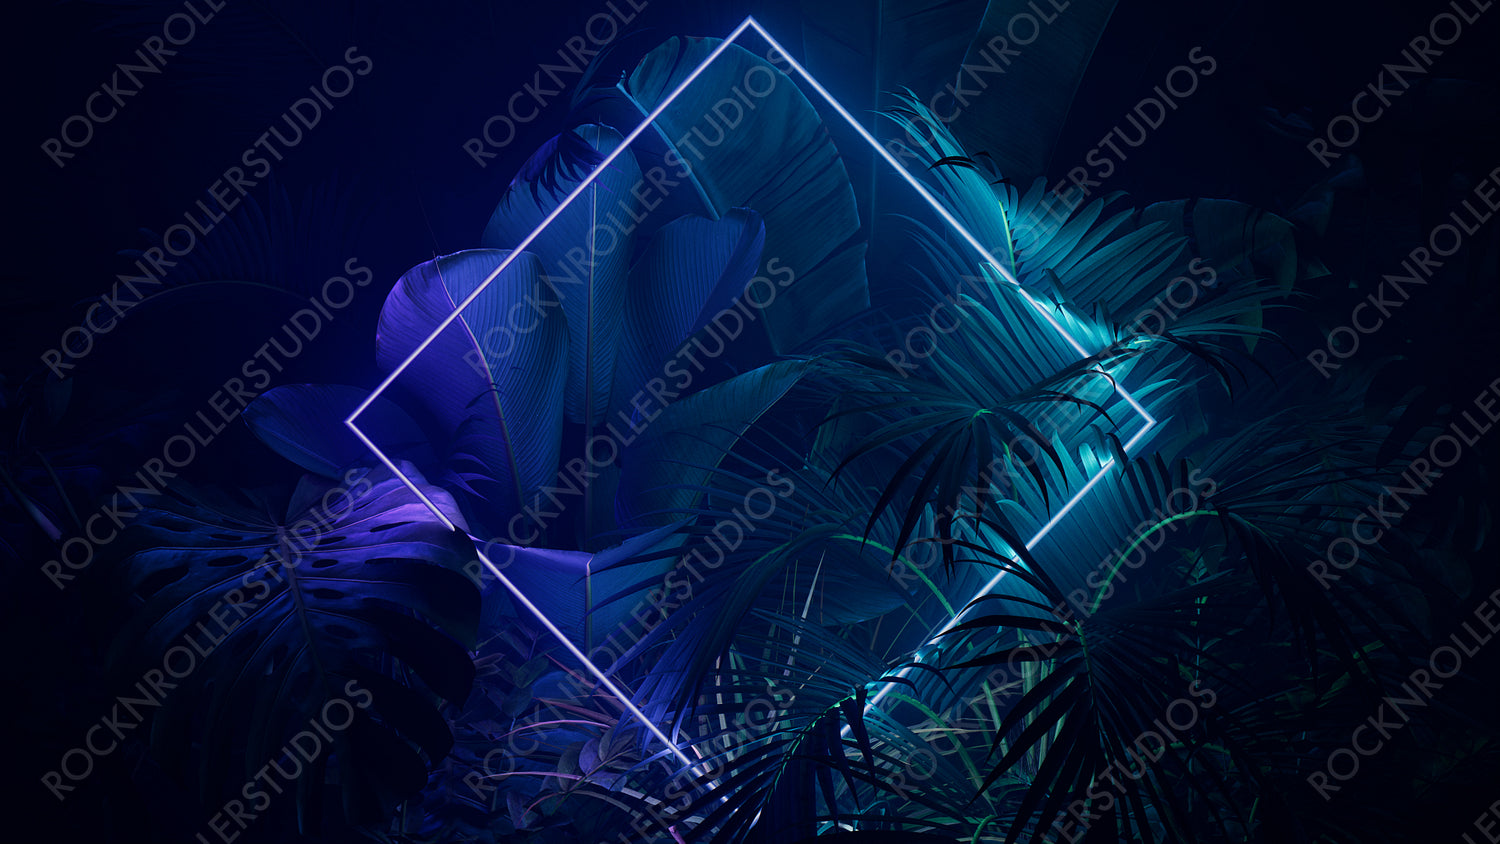 Tropical Plants Illuminated with Green and Purple Fluorescent Light. Jungle Environment with Diamond shaped Neon Frame.